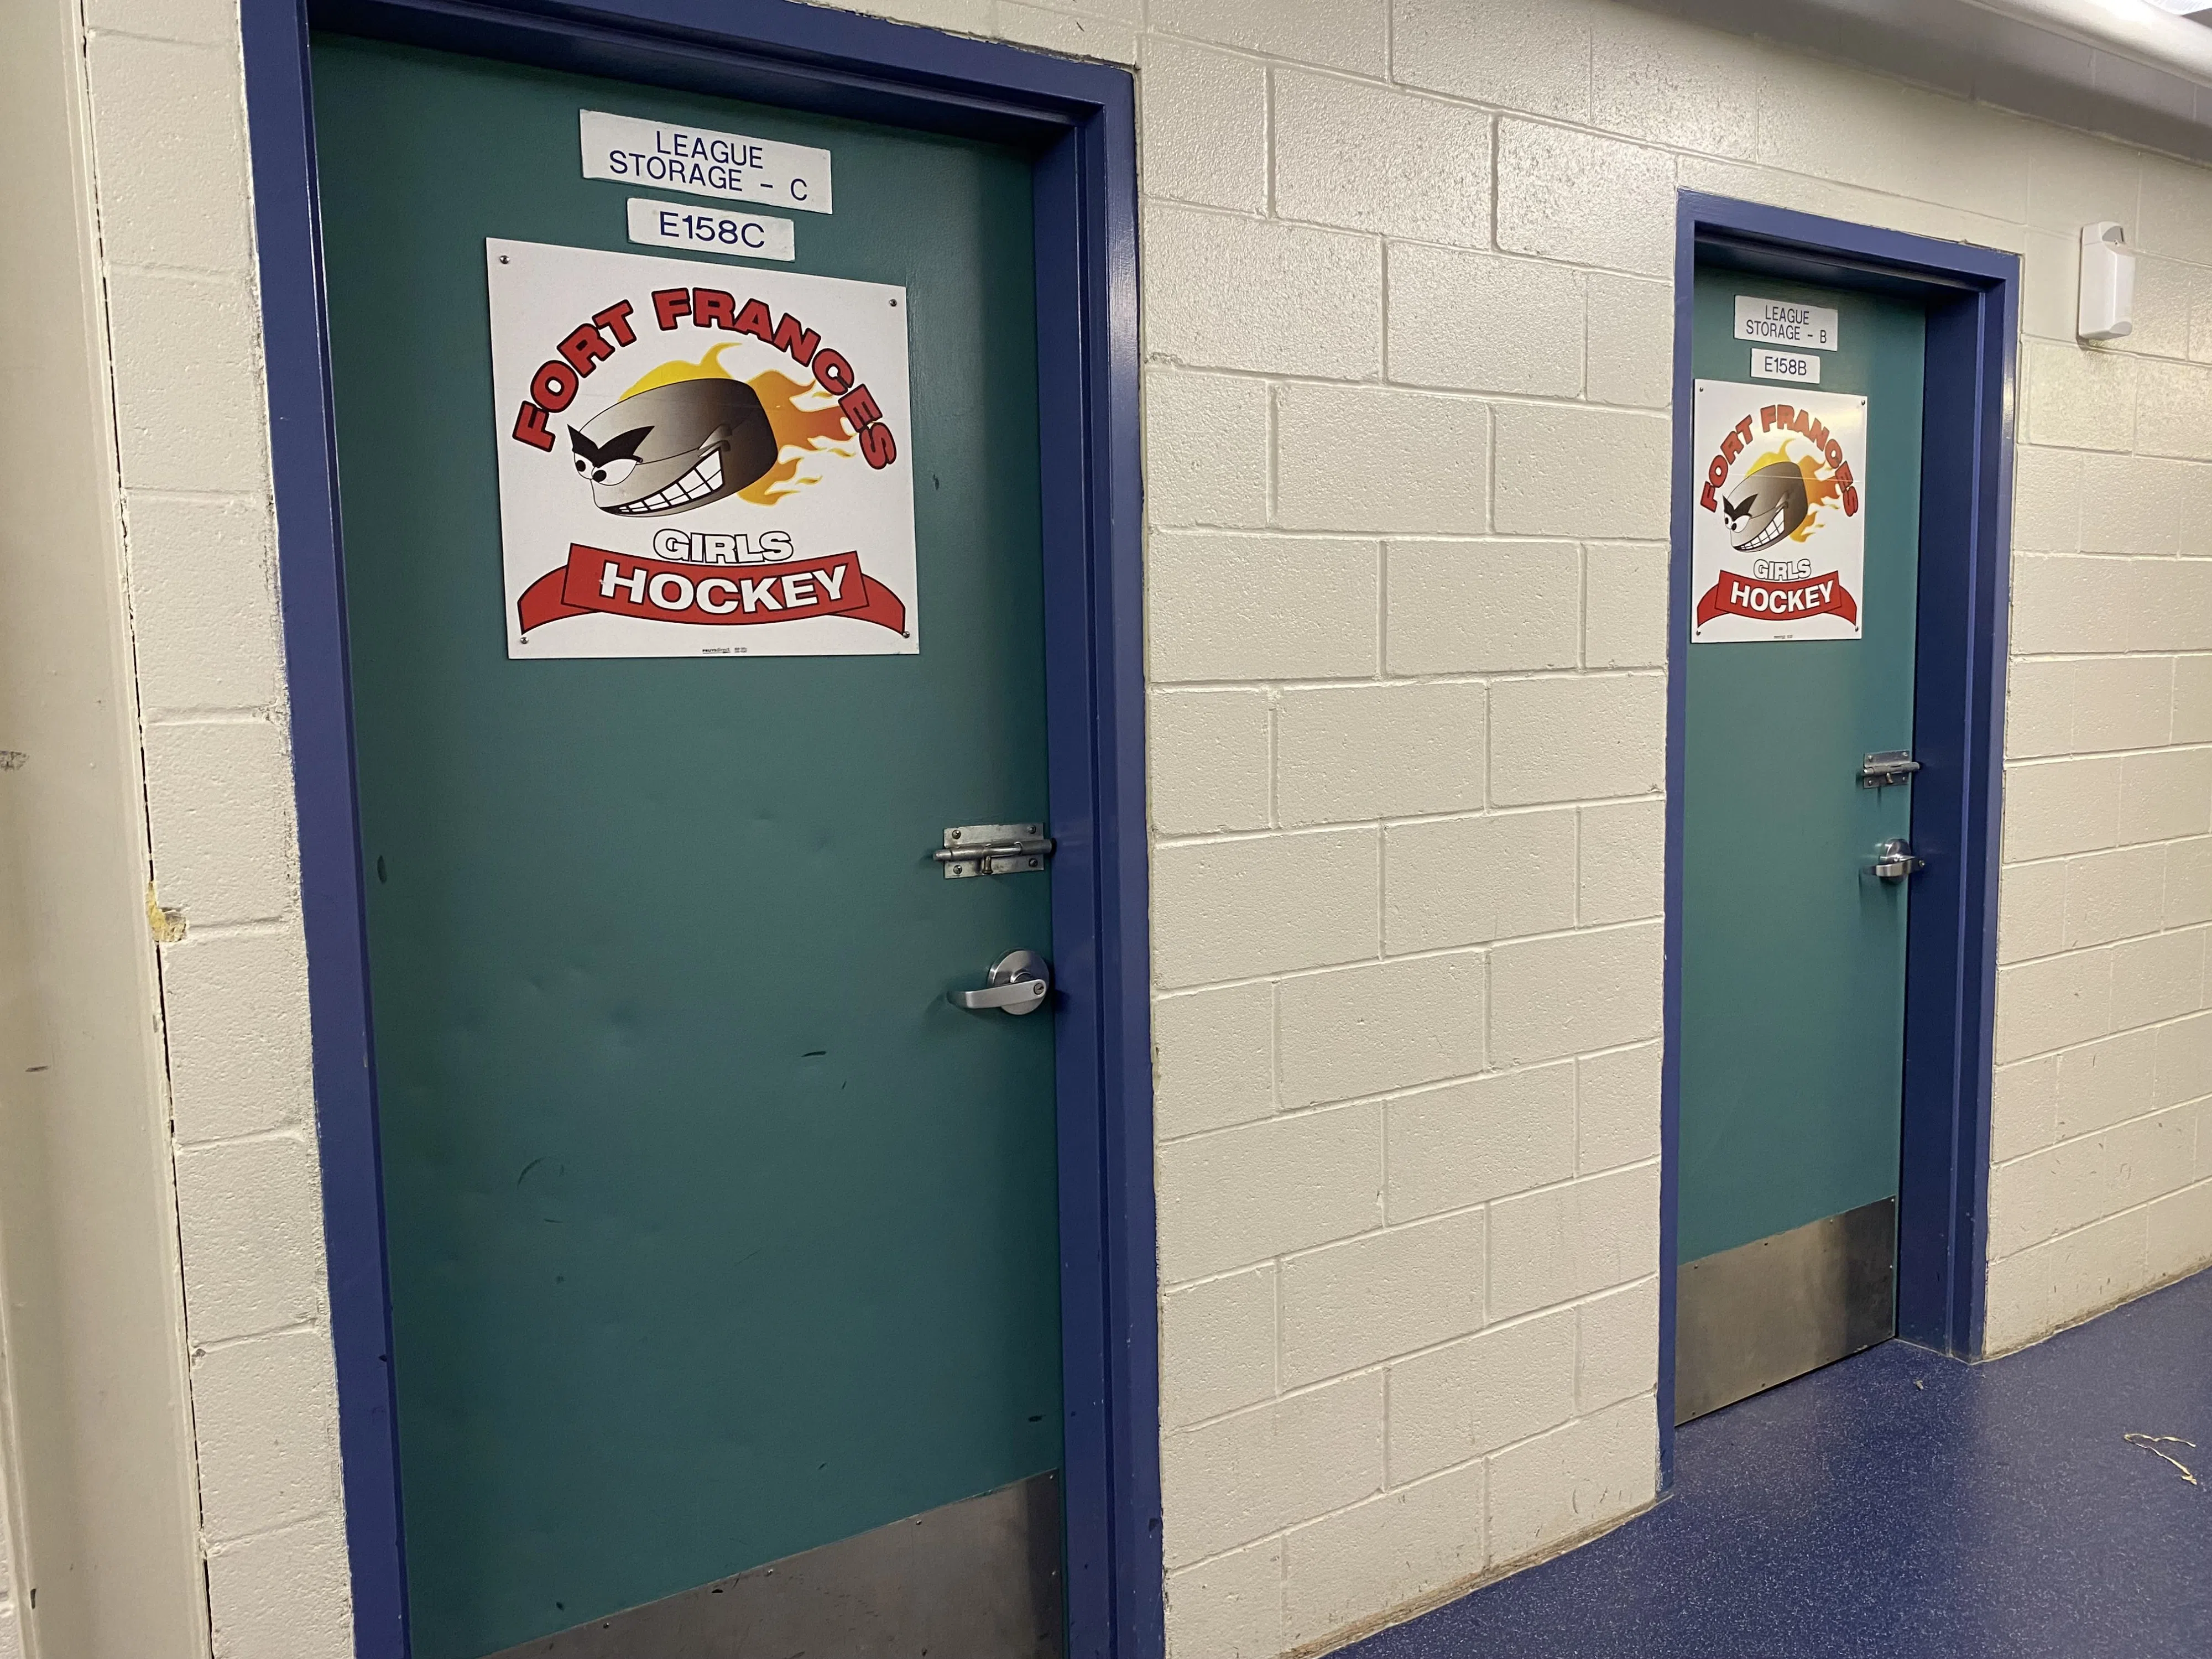 New fees for arena dressing and storage rooms